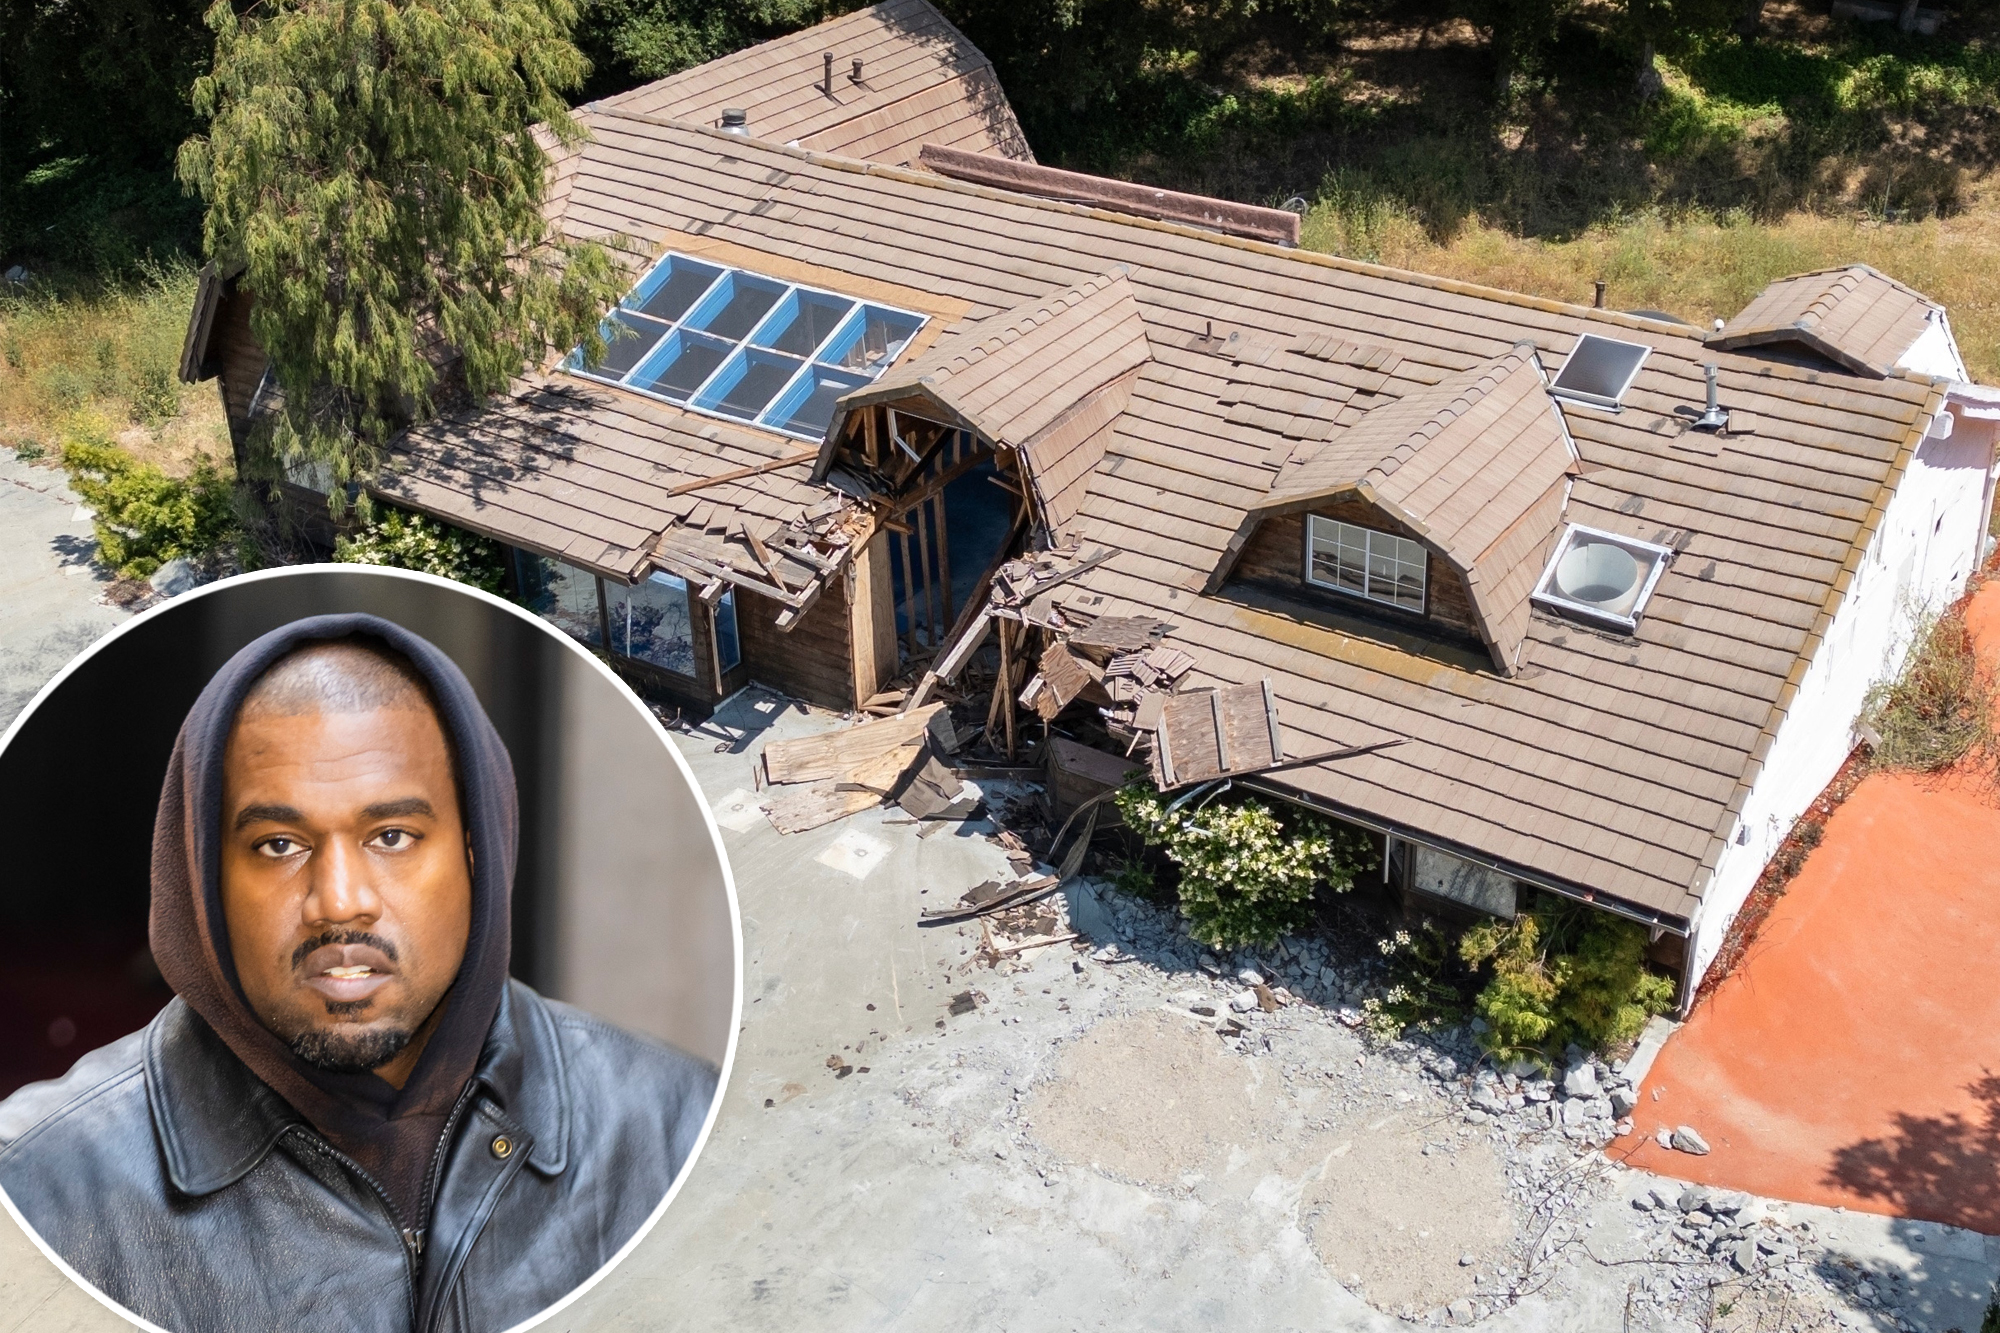 Kanye West's Abandoned Calabasas Ranch: A Tale of Neglect and Controversy